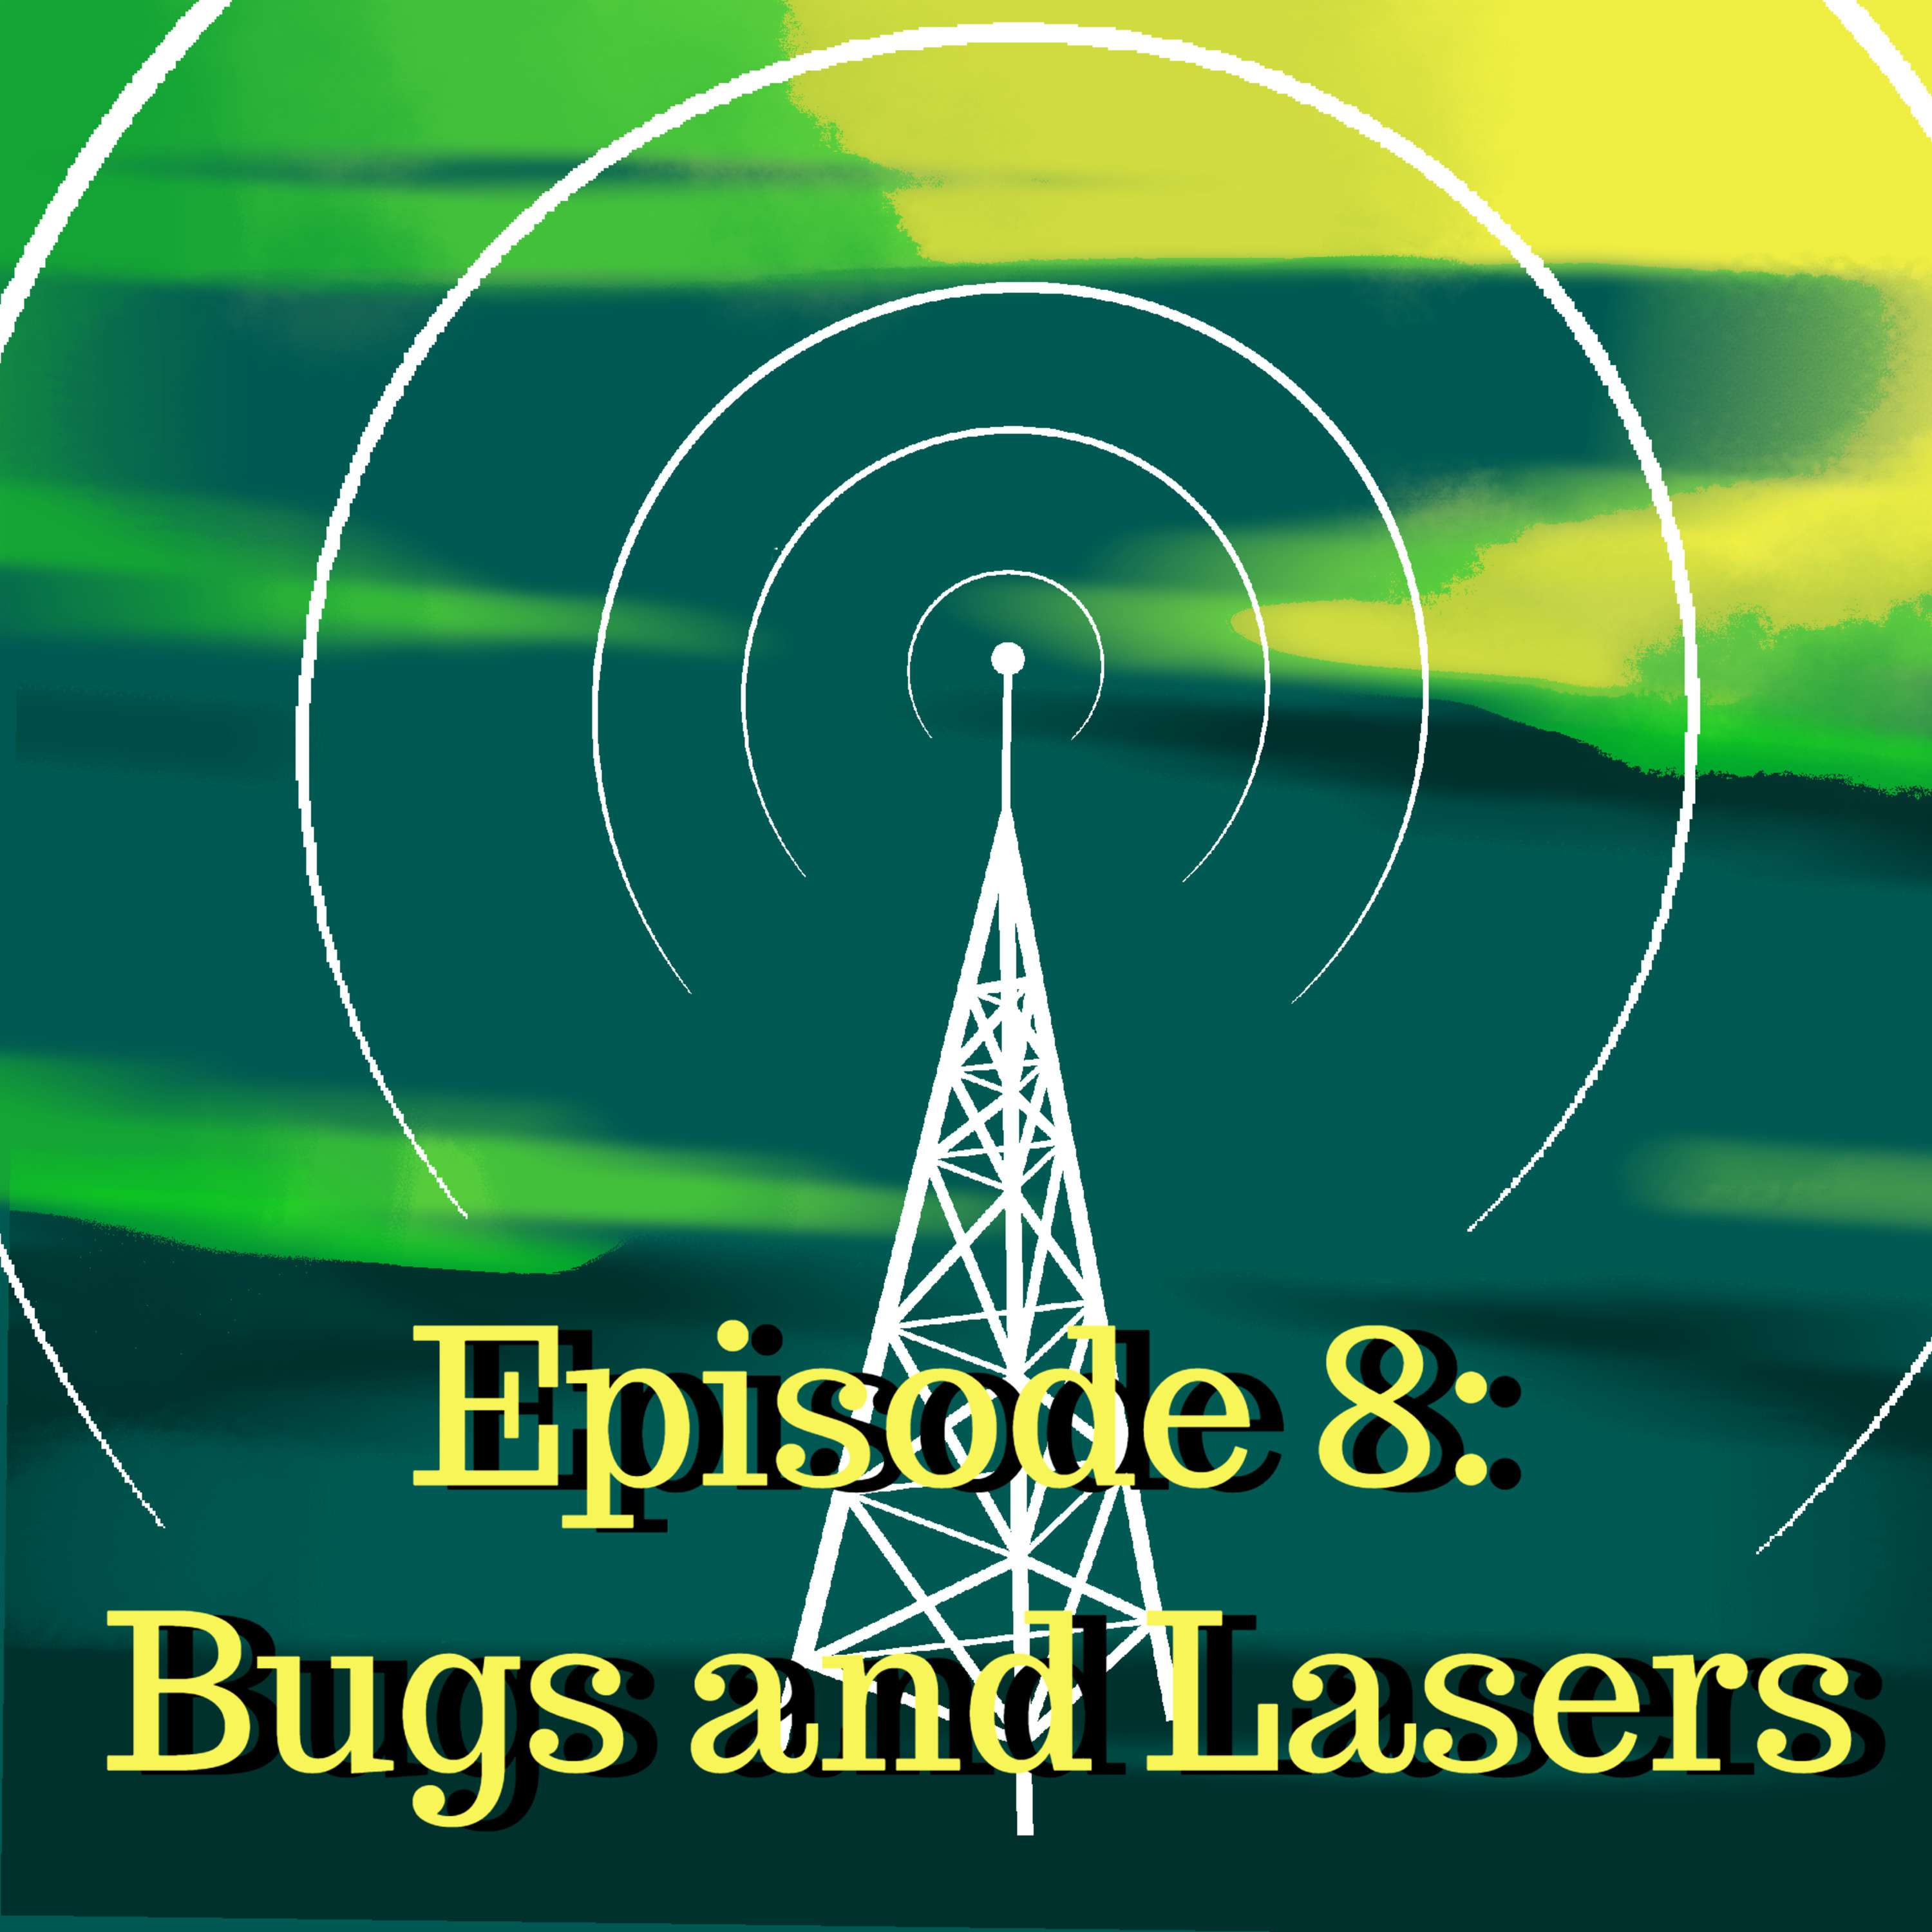 Episode 8: ”Bugs and Lasers”